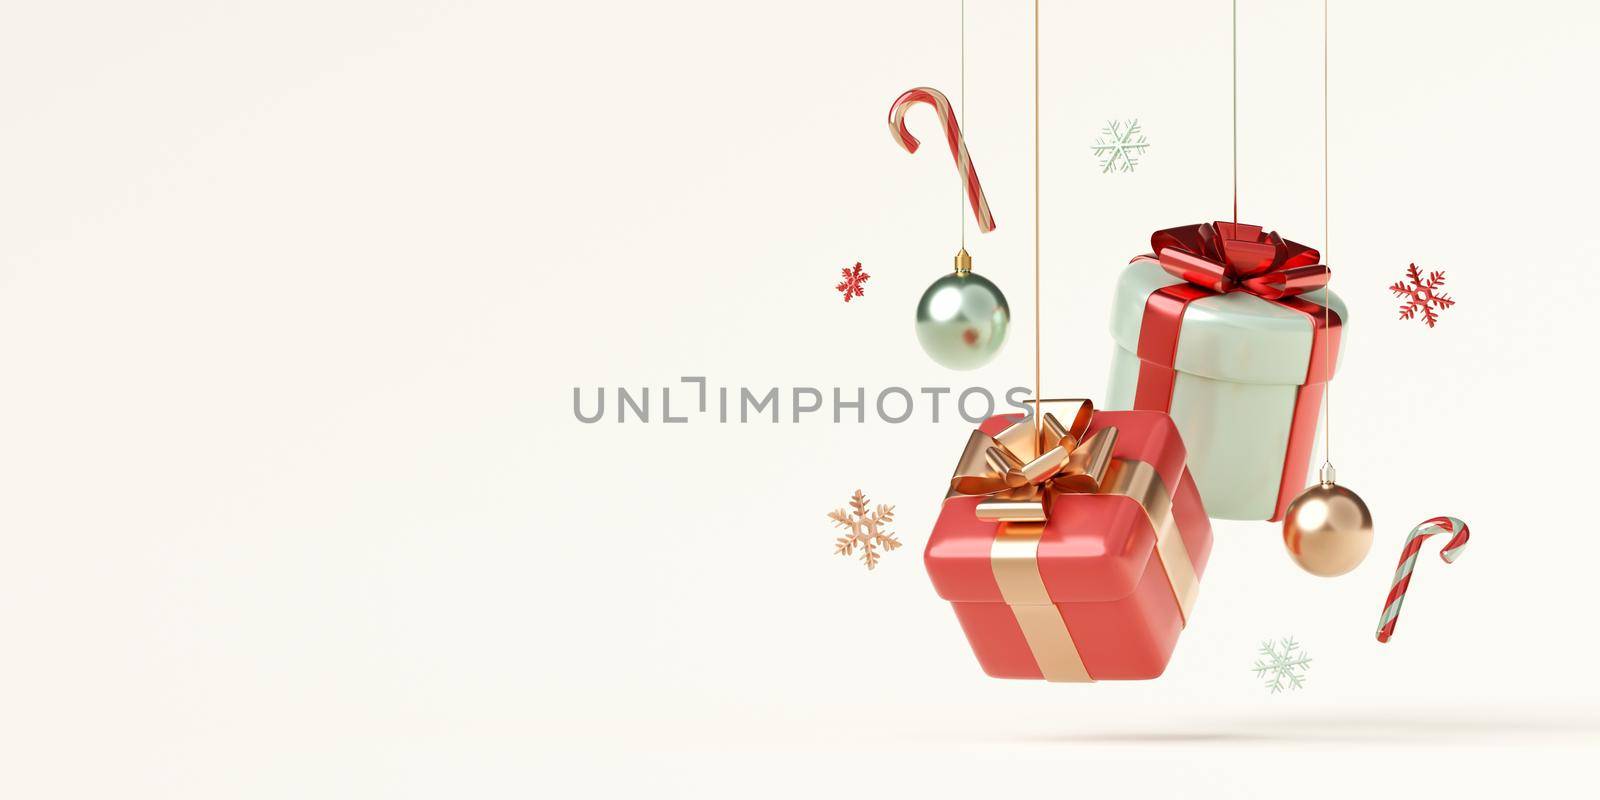 3d illustration web banner of Christmas giftbox with decoration by nutzchotwarut